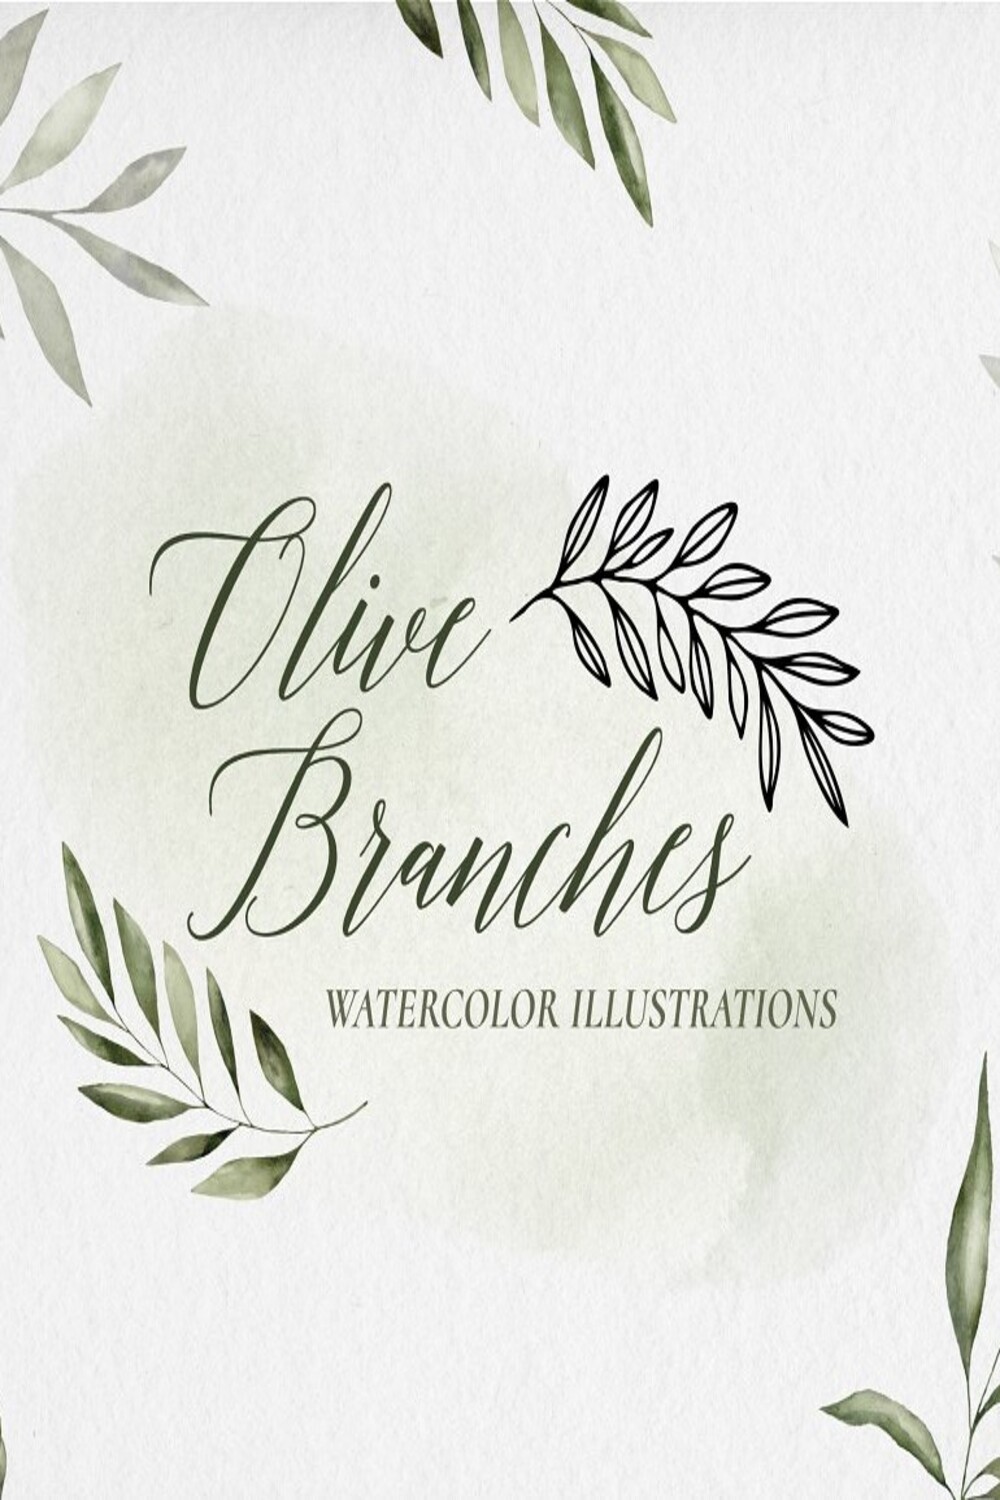 Olive Branches Watercolors Pinterest collage image.